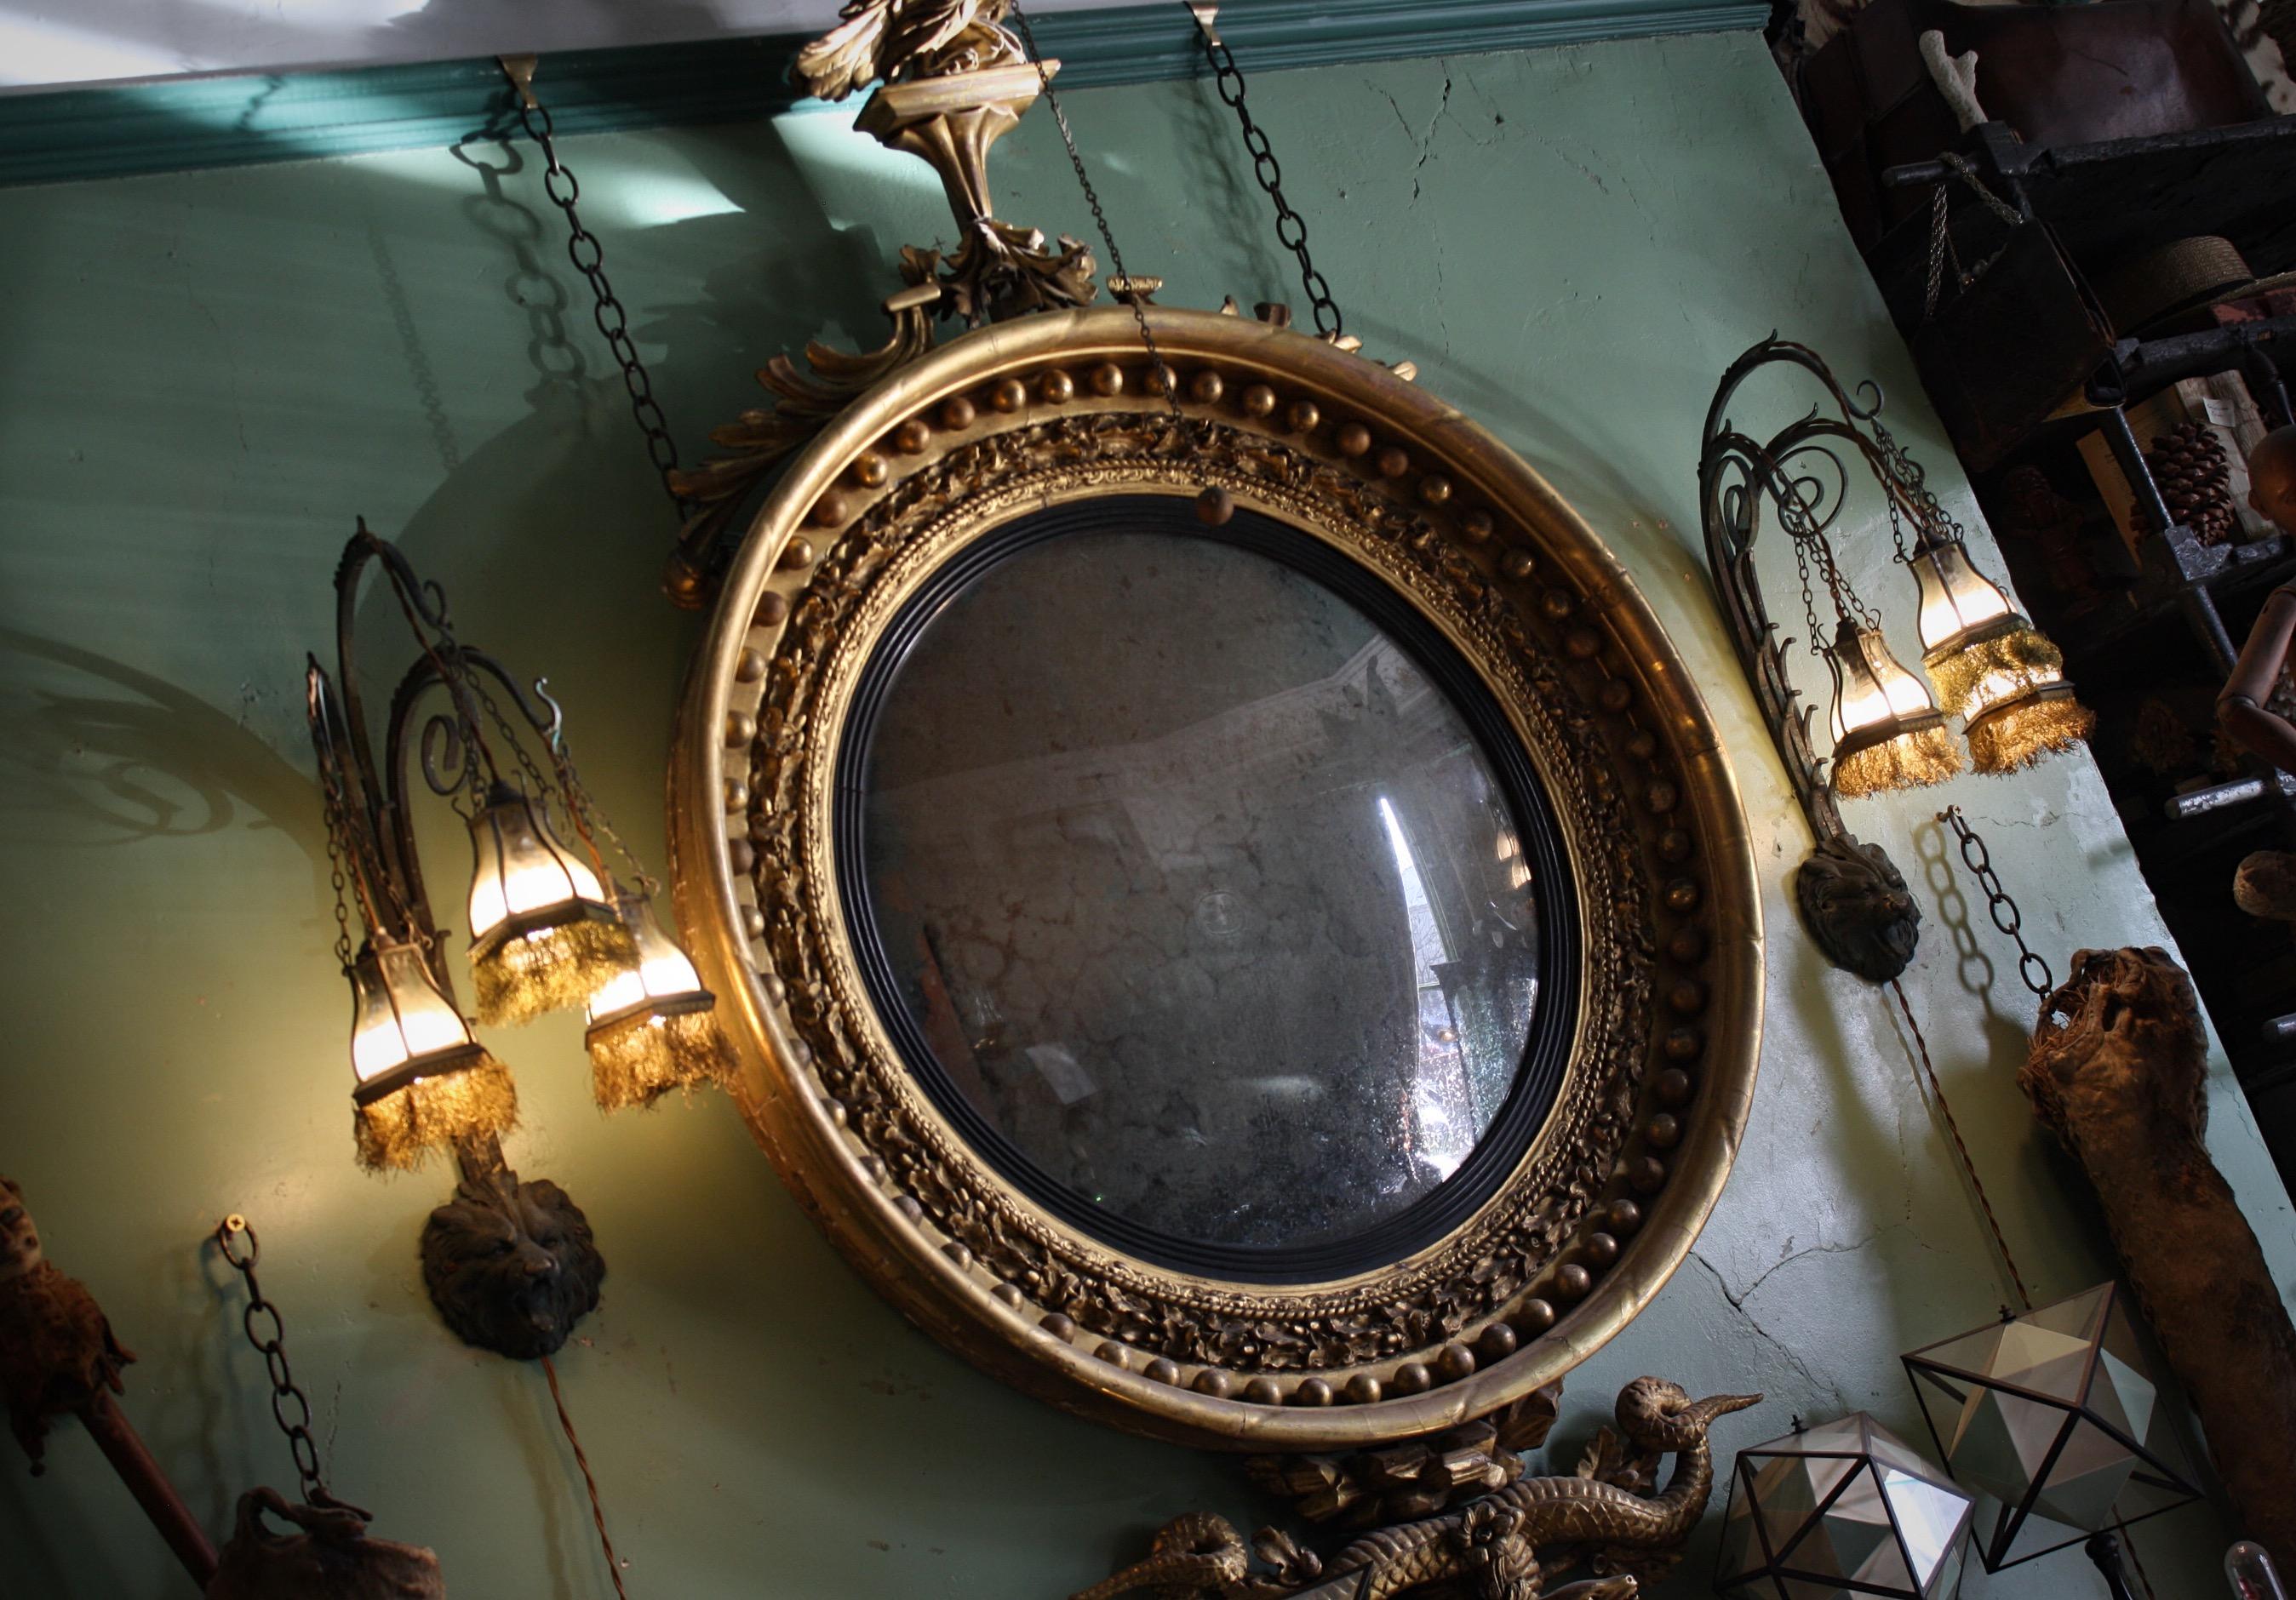 A circa 1820 Regency gilt convex mirror of grand proportions and typically form.

Ebonised reeded slip, applied gilt spheres and surmounted by an eagle perched with its wings spread holding a ball and chain.

The bottom of the mirror is